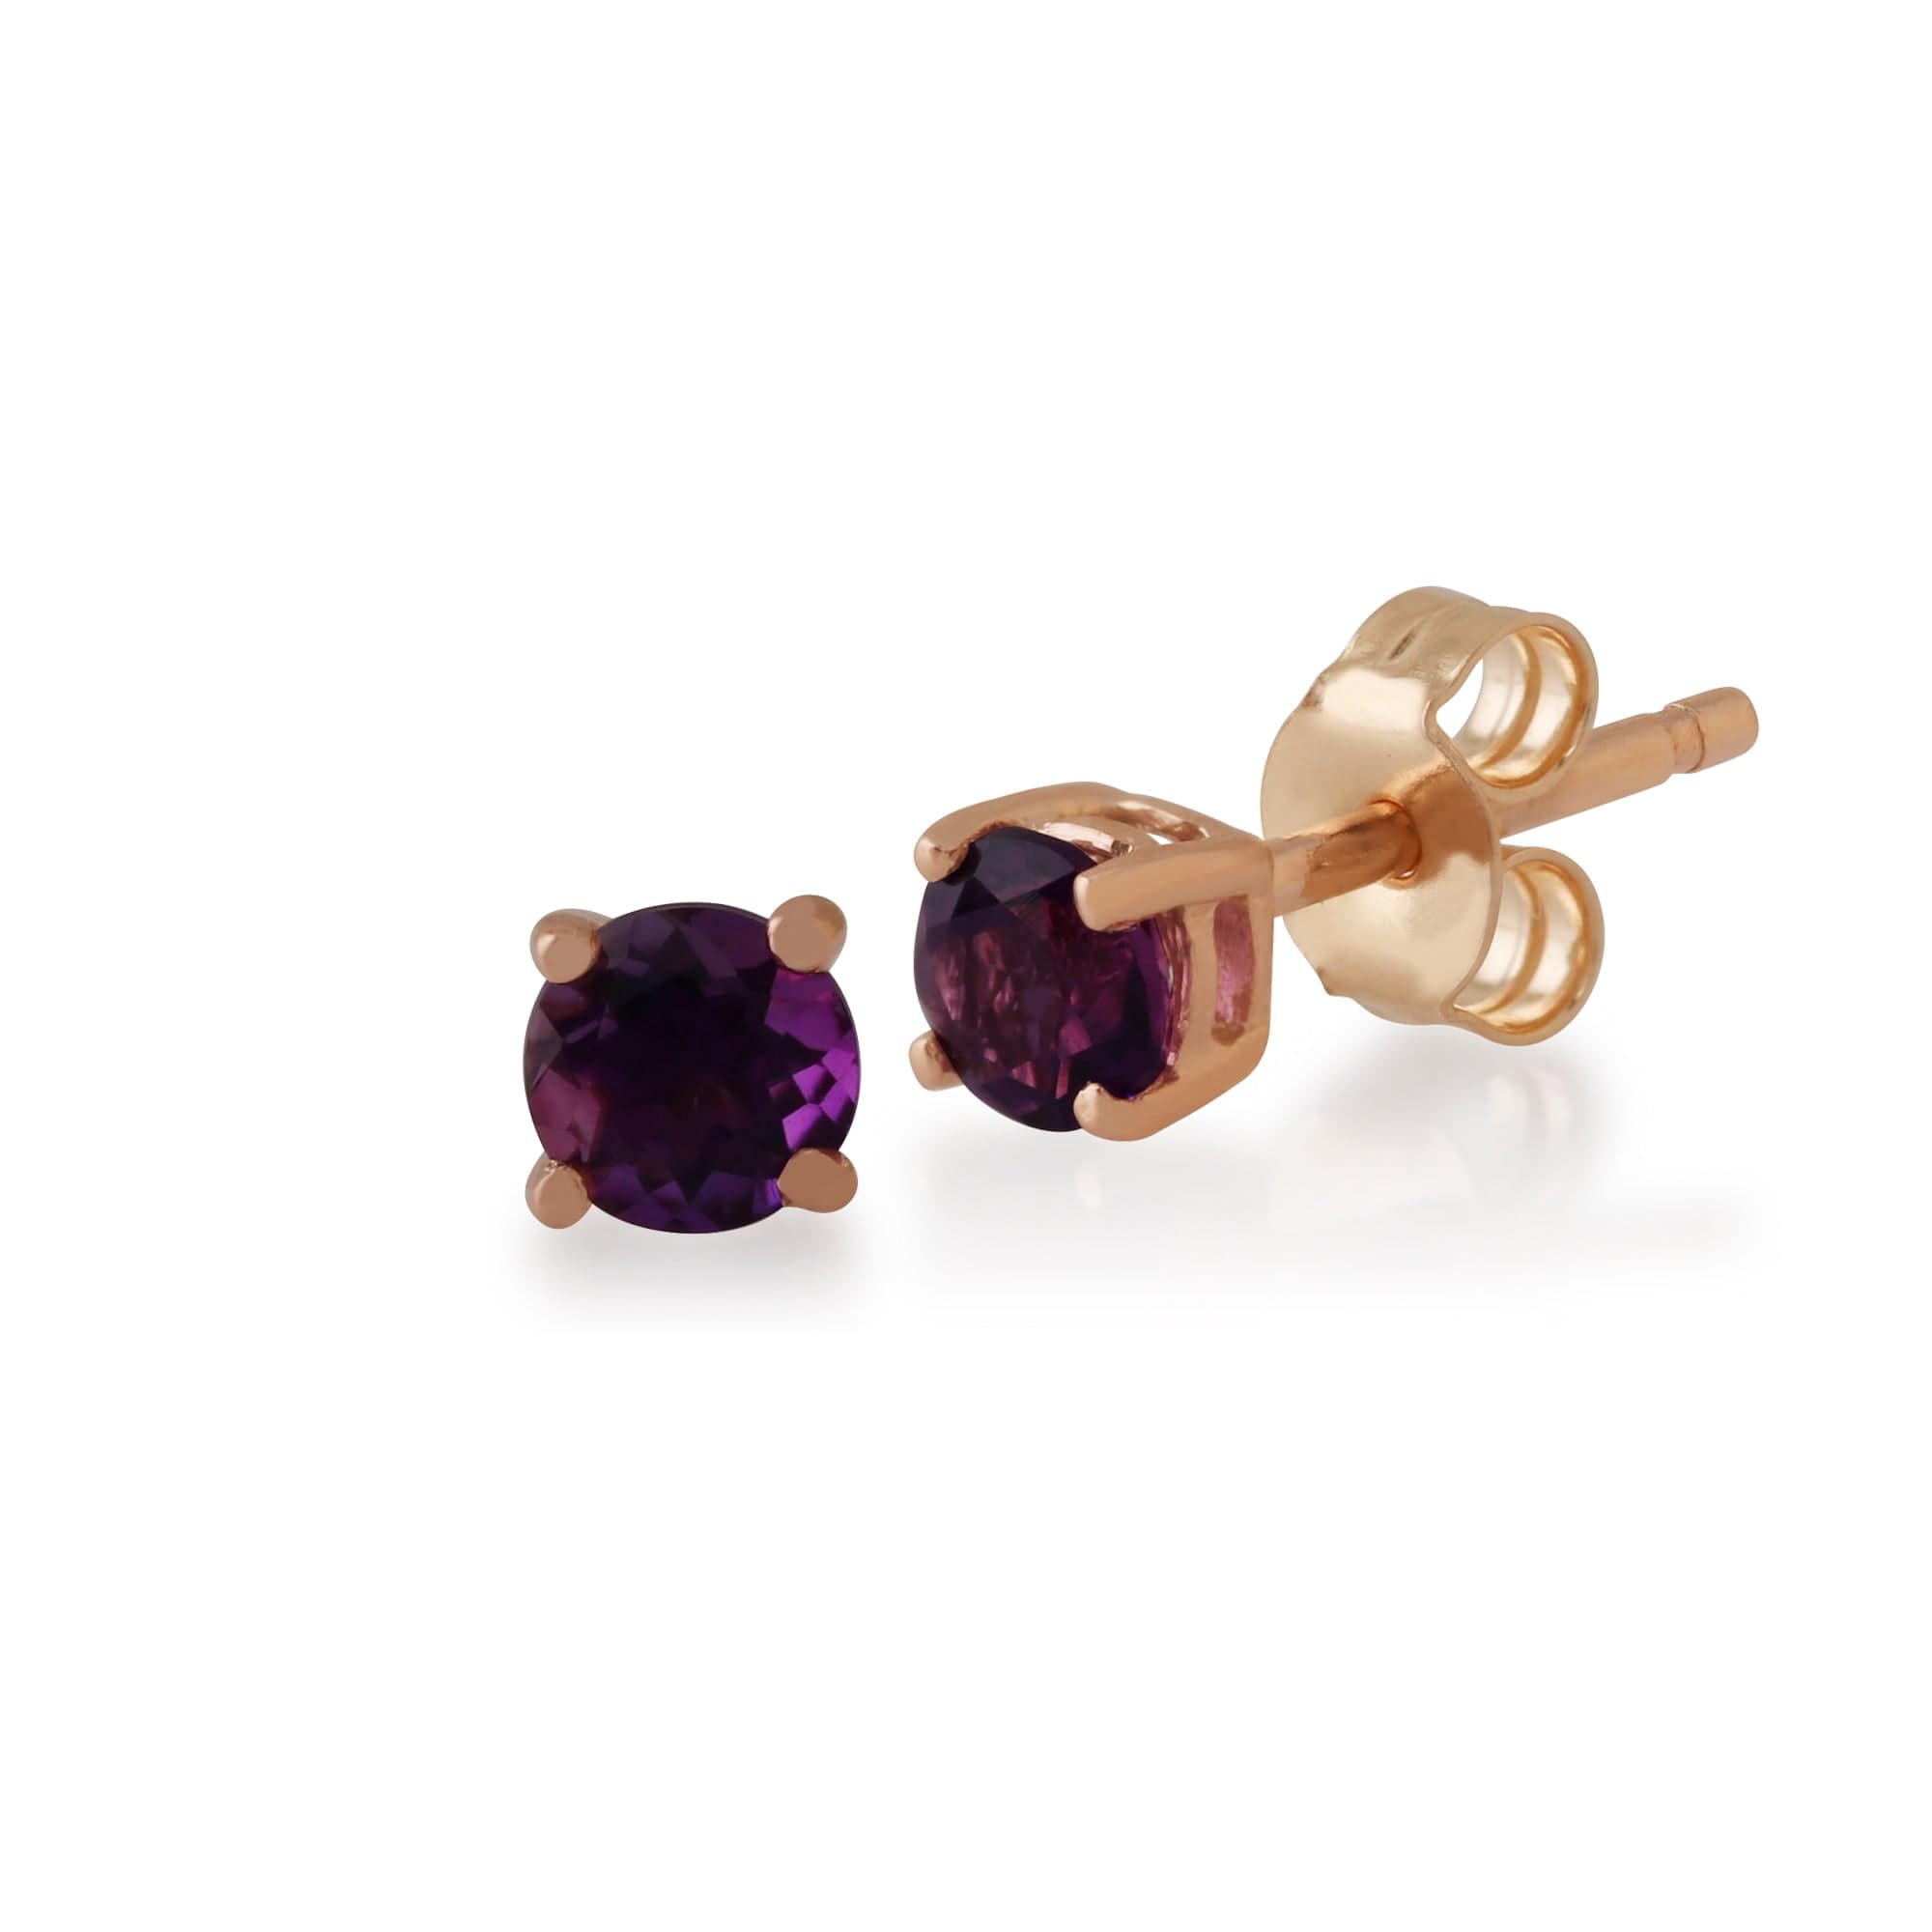 Classic Round Amethyst Stud Earrings with Detachable Diamond Flower Jacket in 9ct Rose Gold - Gemondo